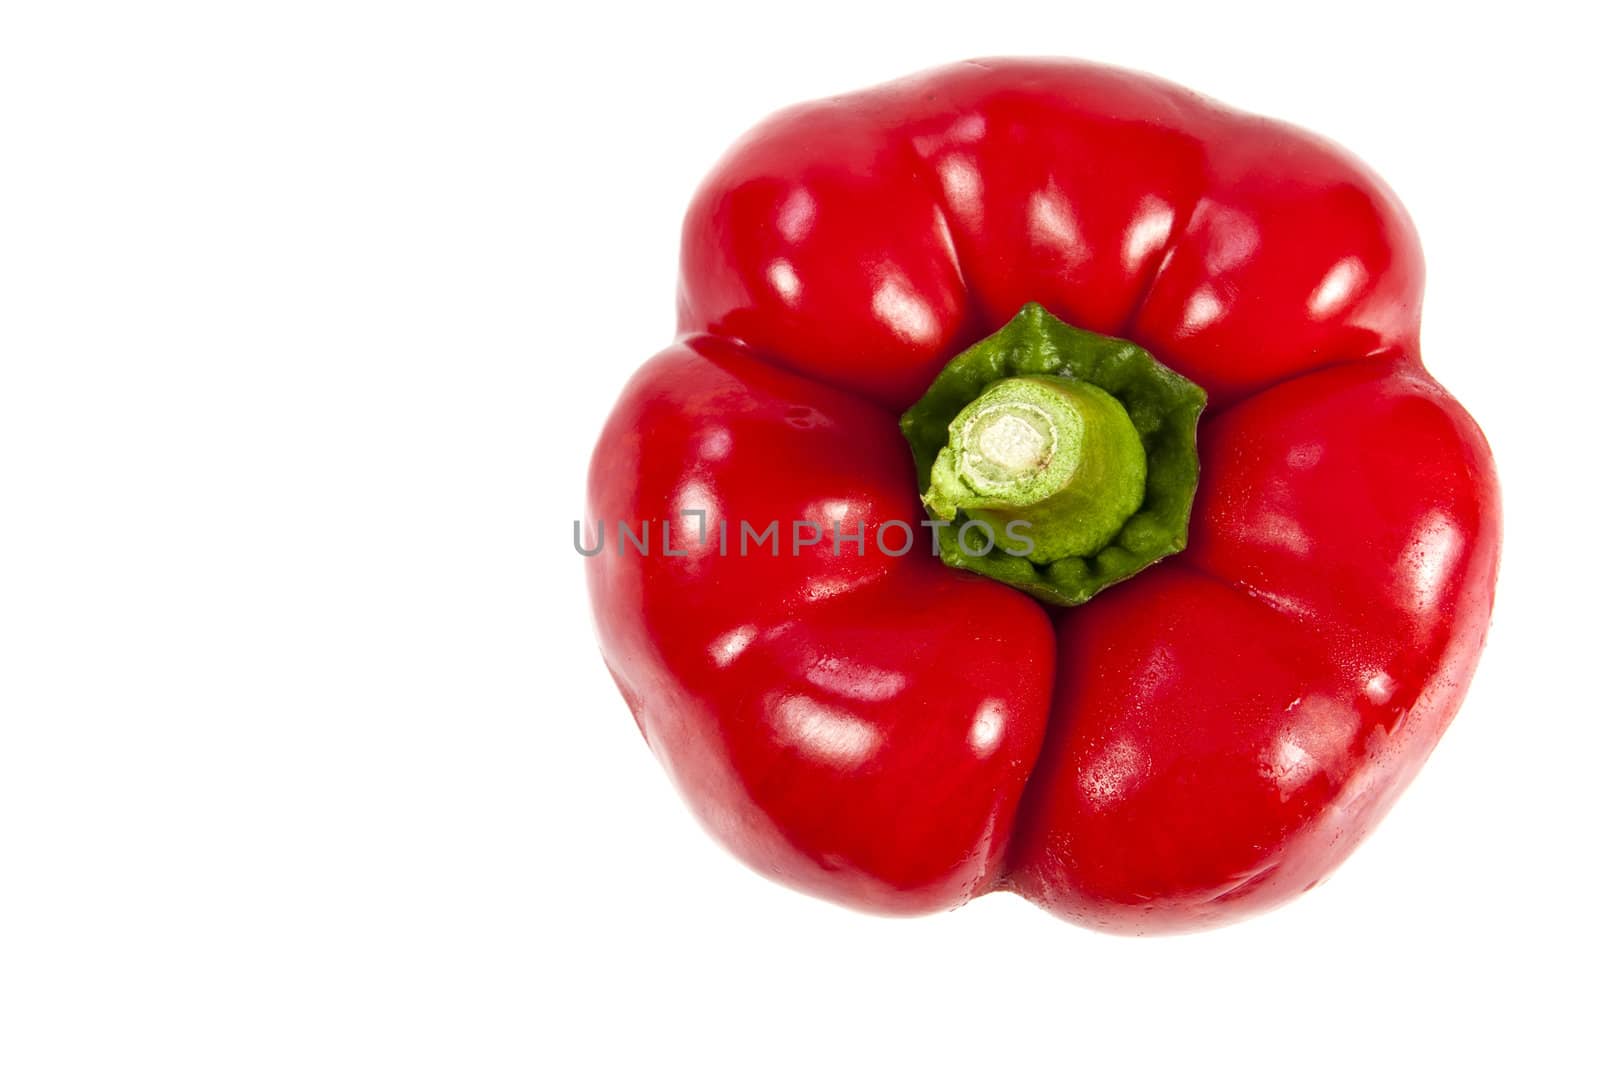 Red bell pepper by posterize